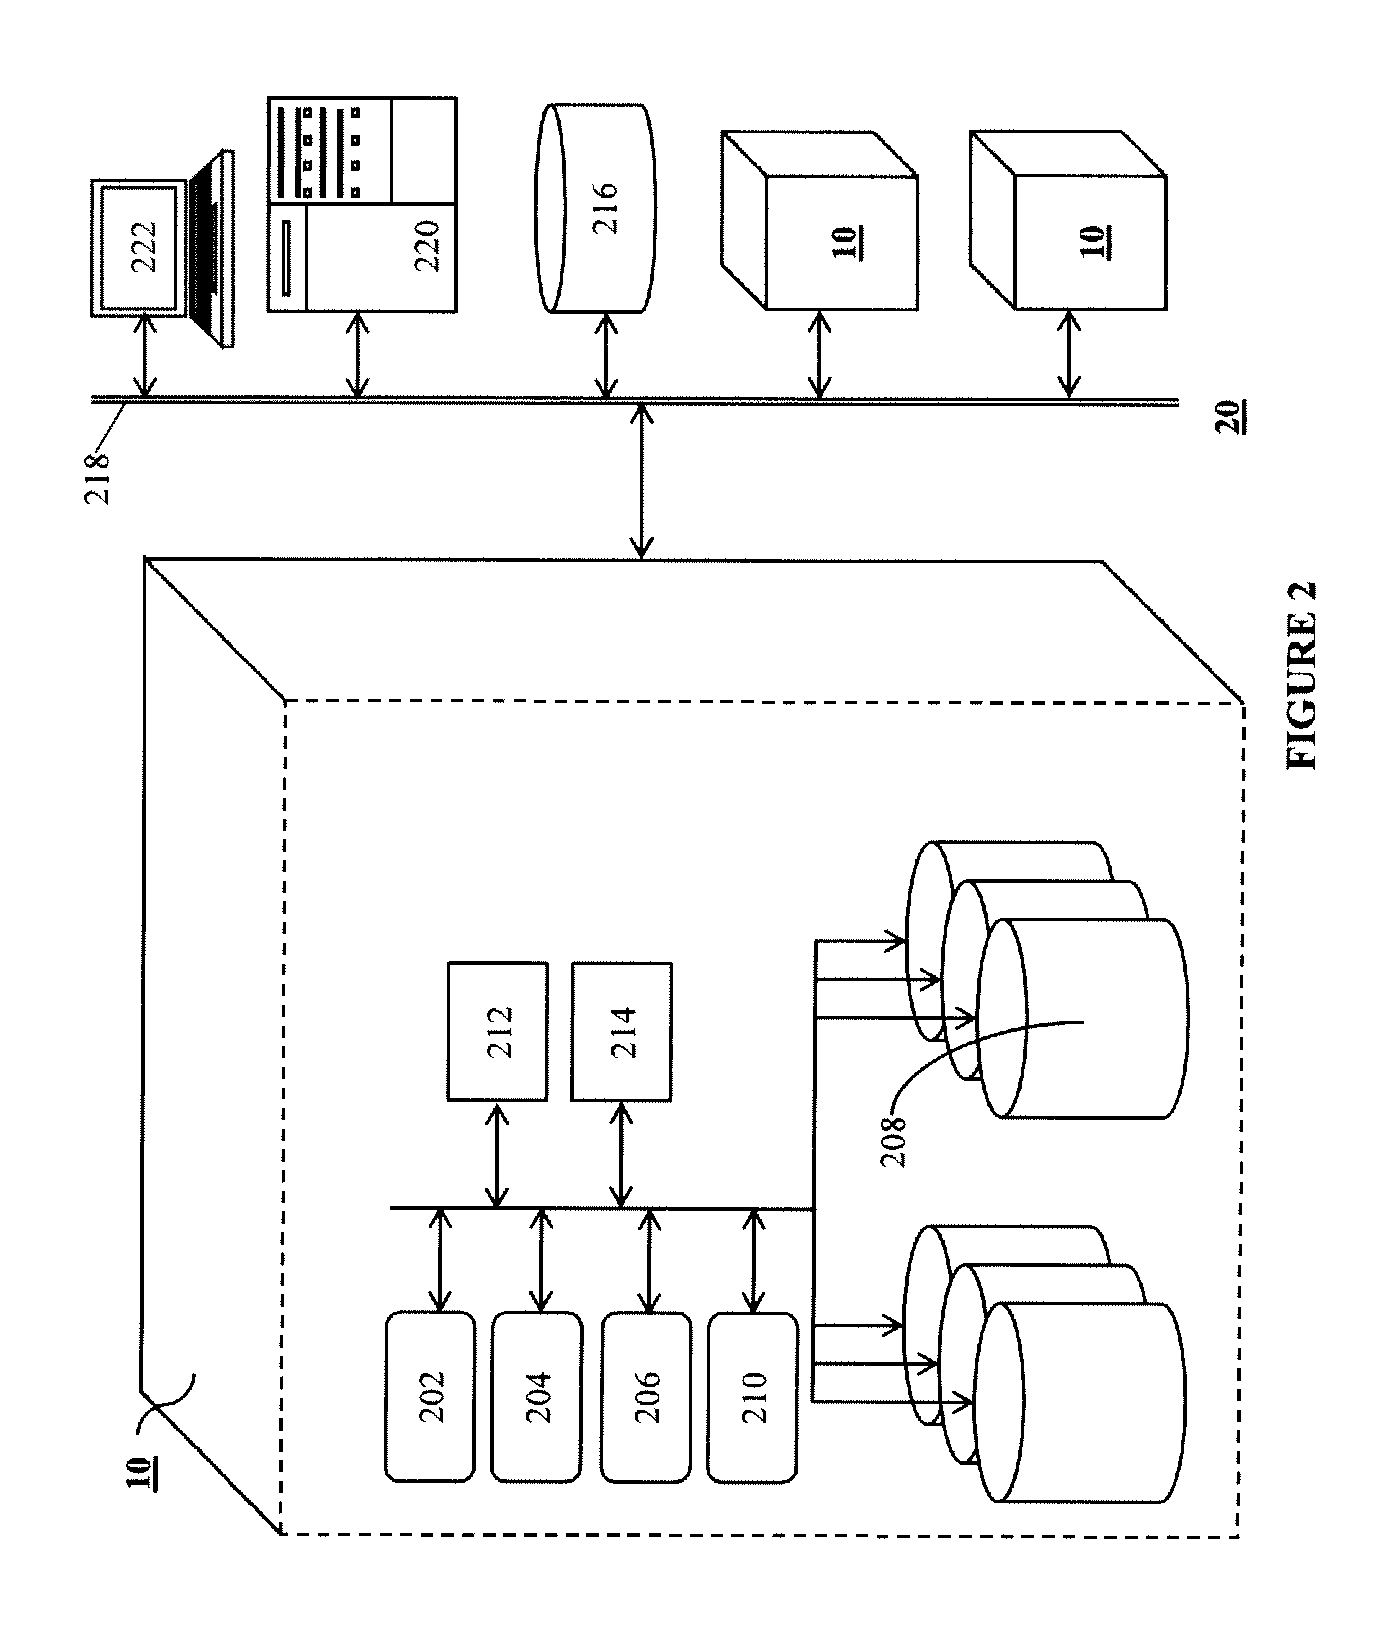 Method and Apparatus for Collecting Recyclable Materials